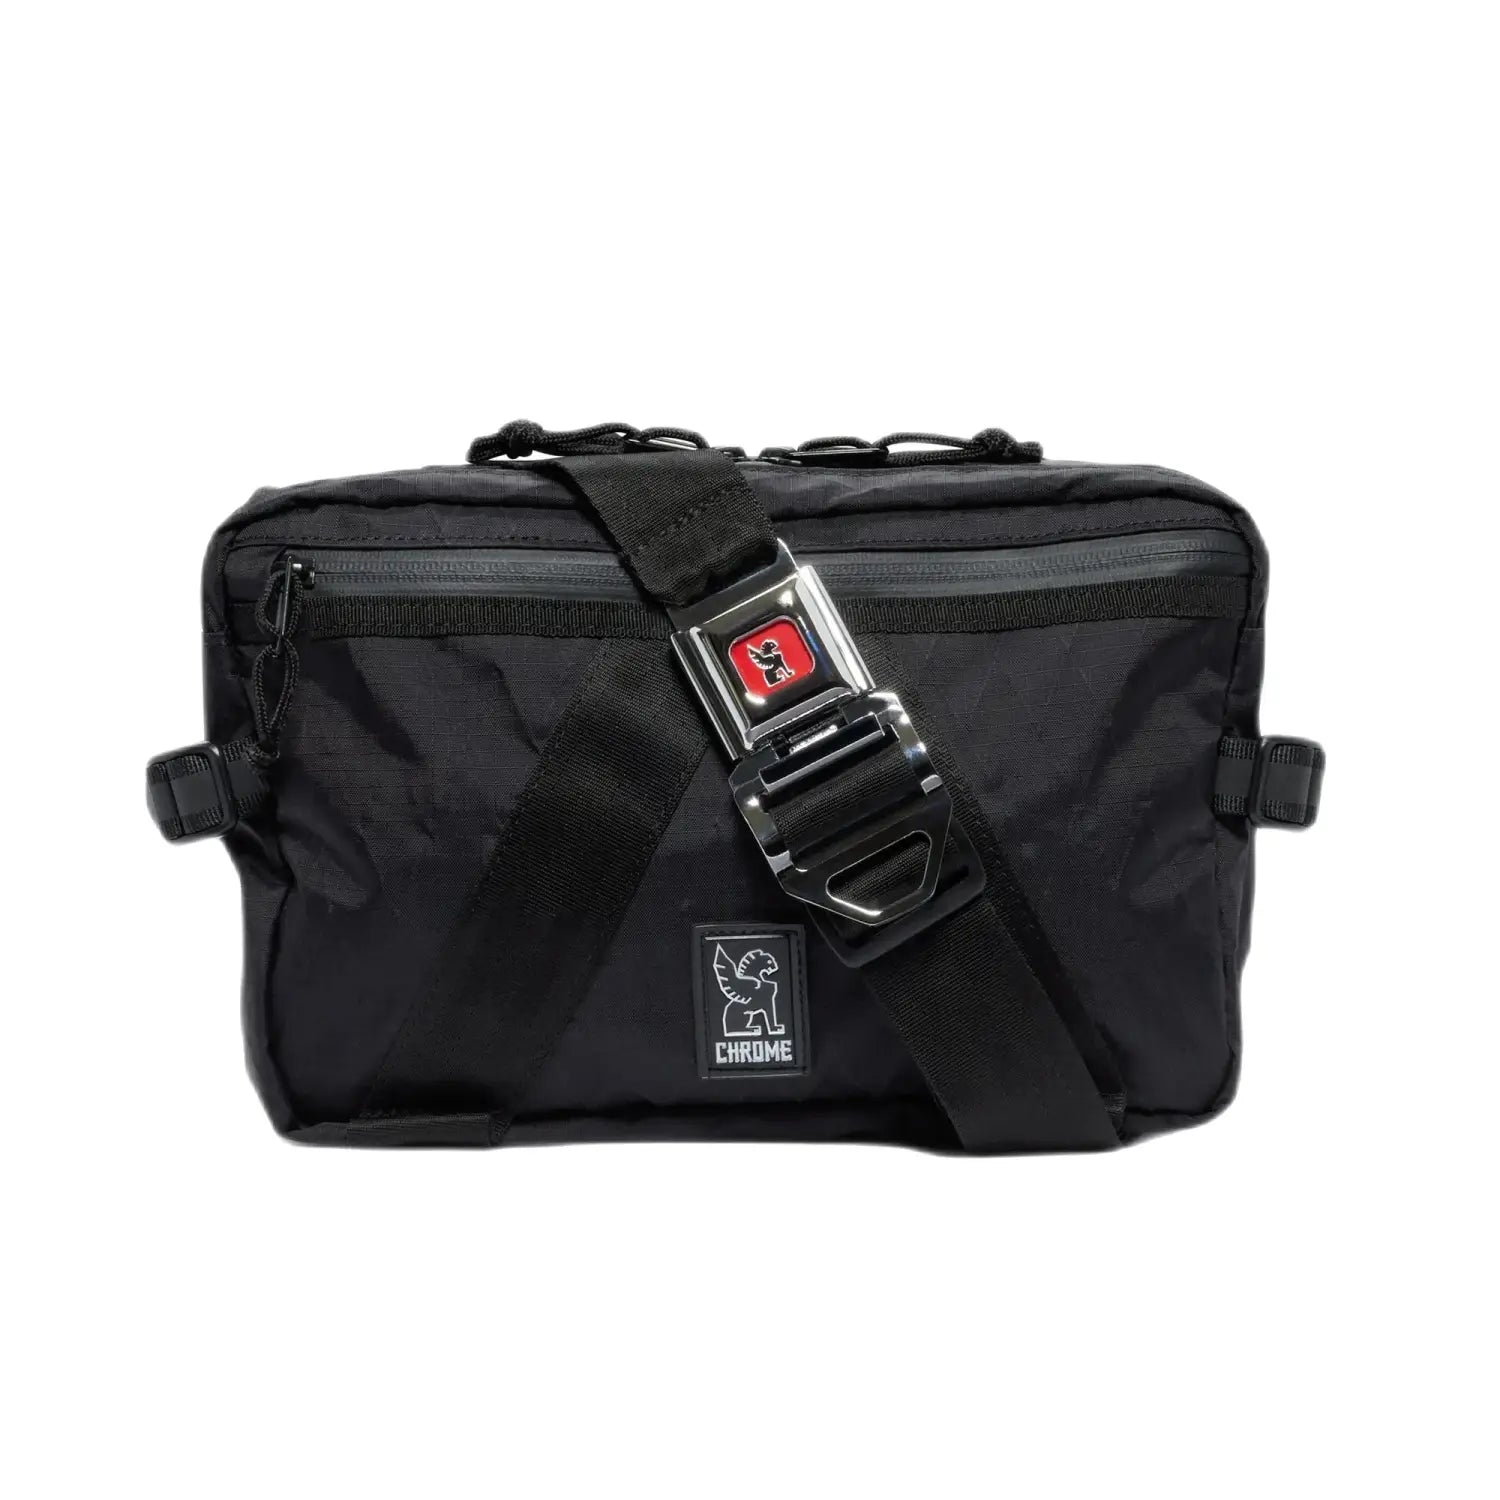 Chrome Industries Tensile Sling Bag shown in the Black-X color option. Front view.